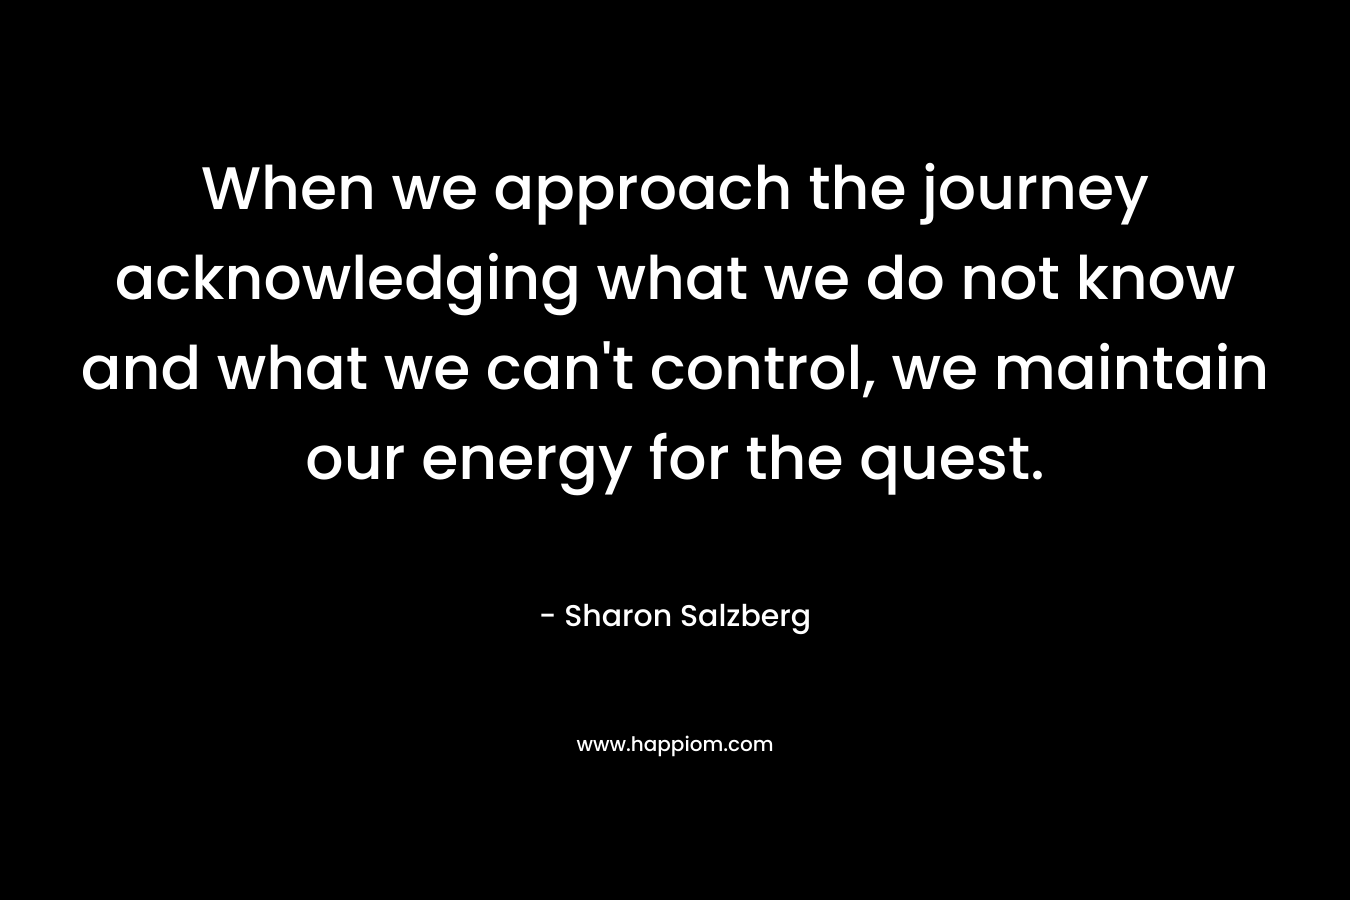 When we approach the journey acknowledging what we do not know and what we can't control, we maintain our energy for the quest.